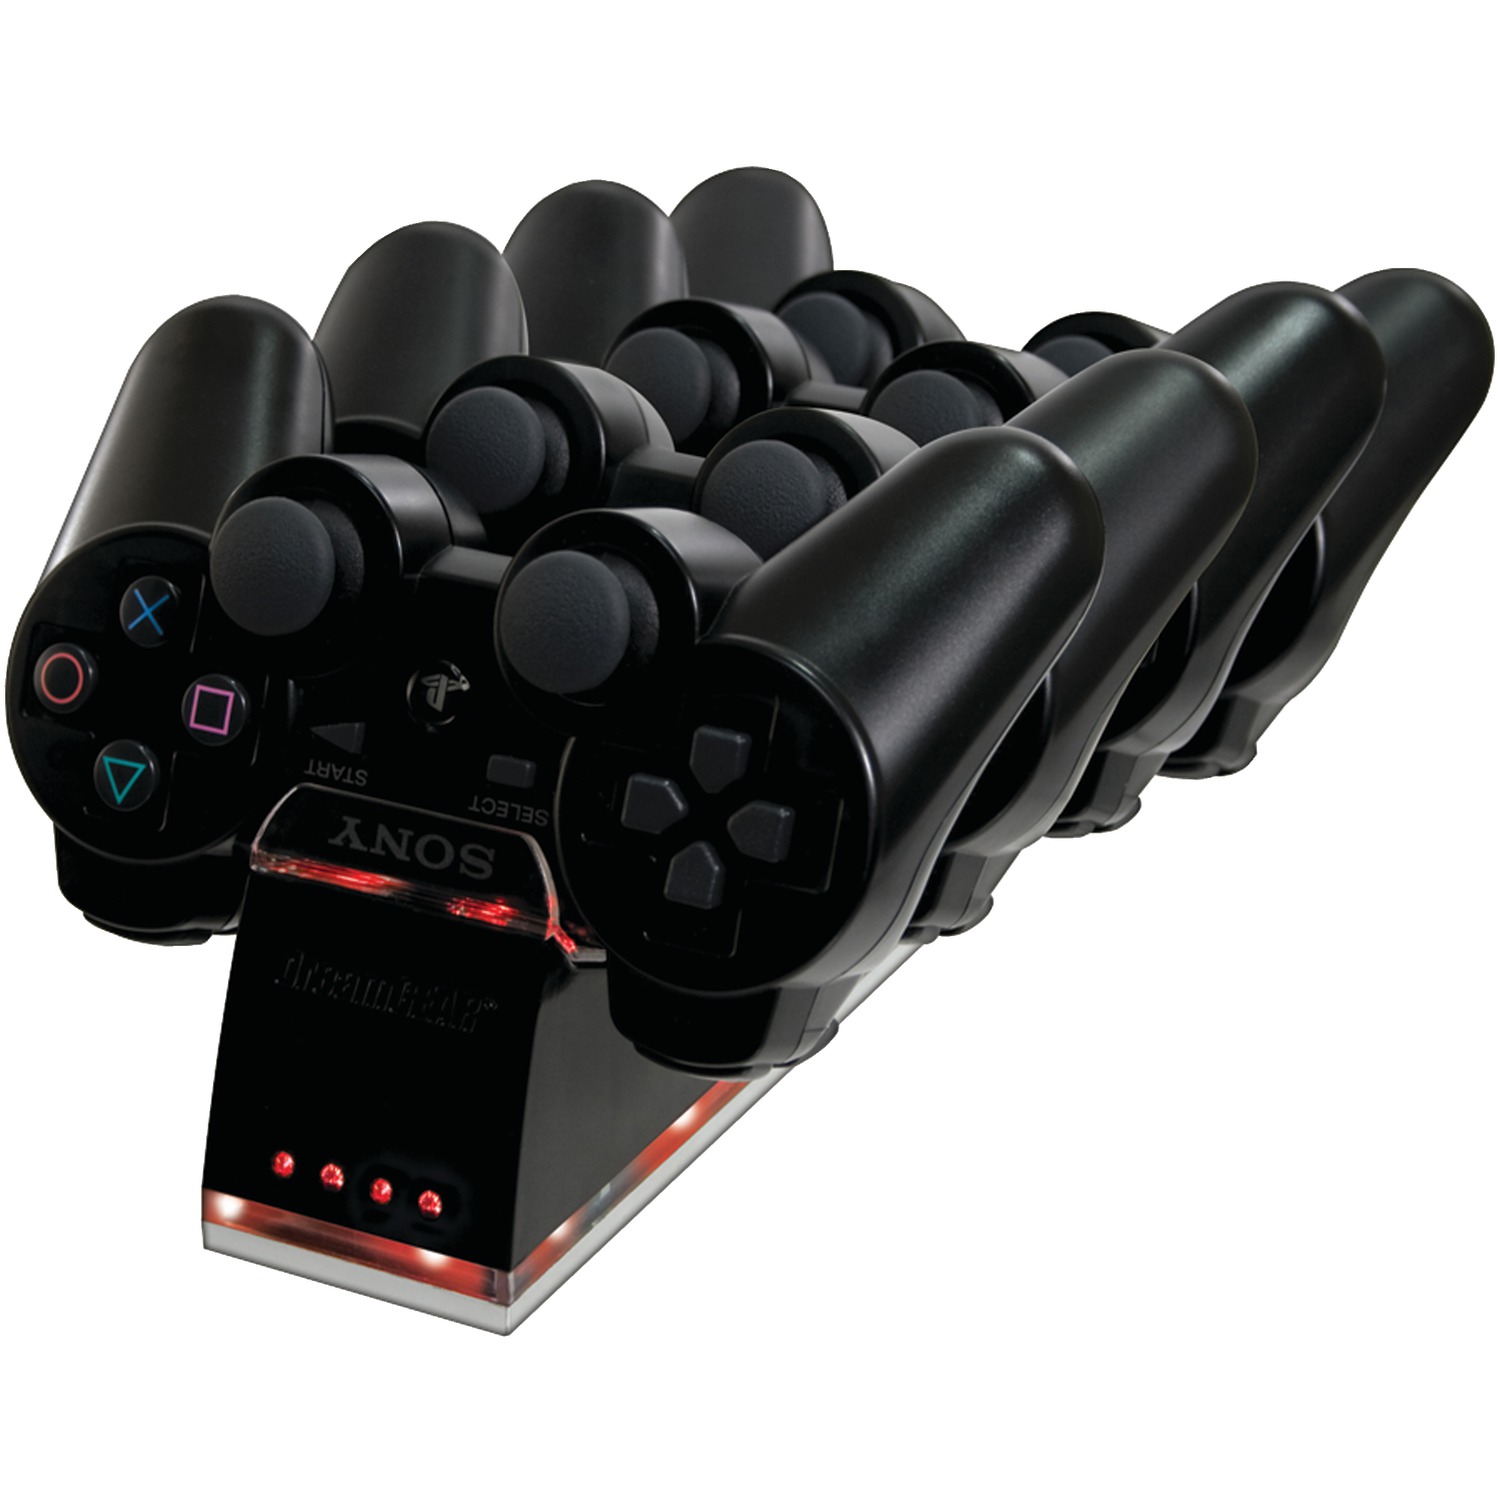 dreamGEAR Quad Dock - Charging stand + AC power adapter - 4 output connectors - black - for Sony DualShock 3; SIXAXIS - image 2 of 5